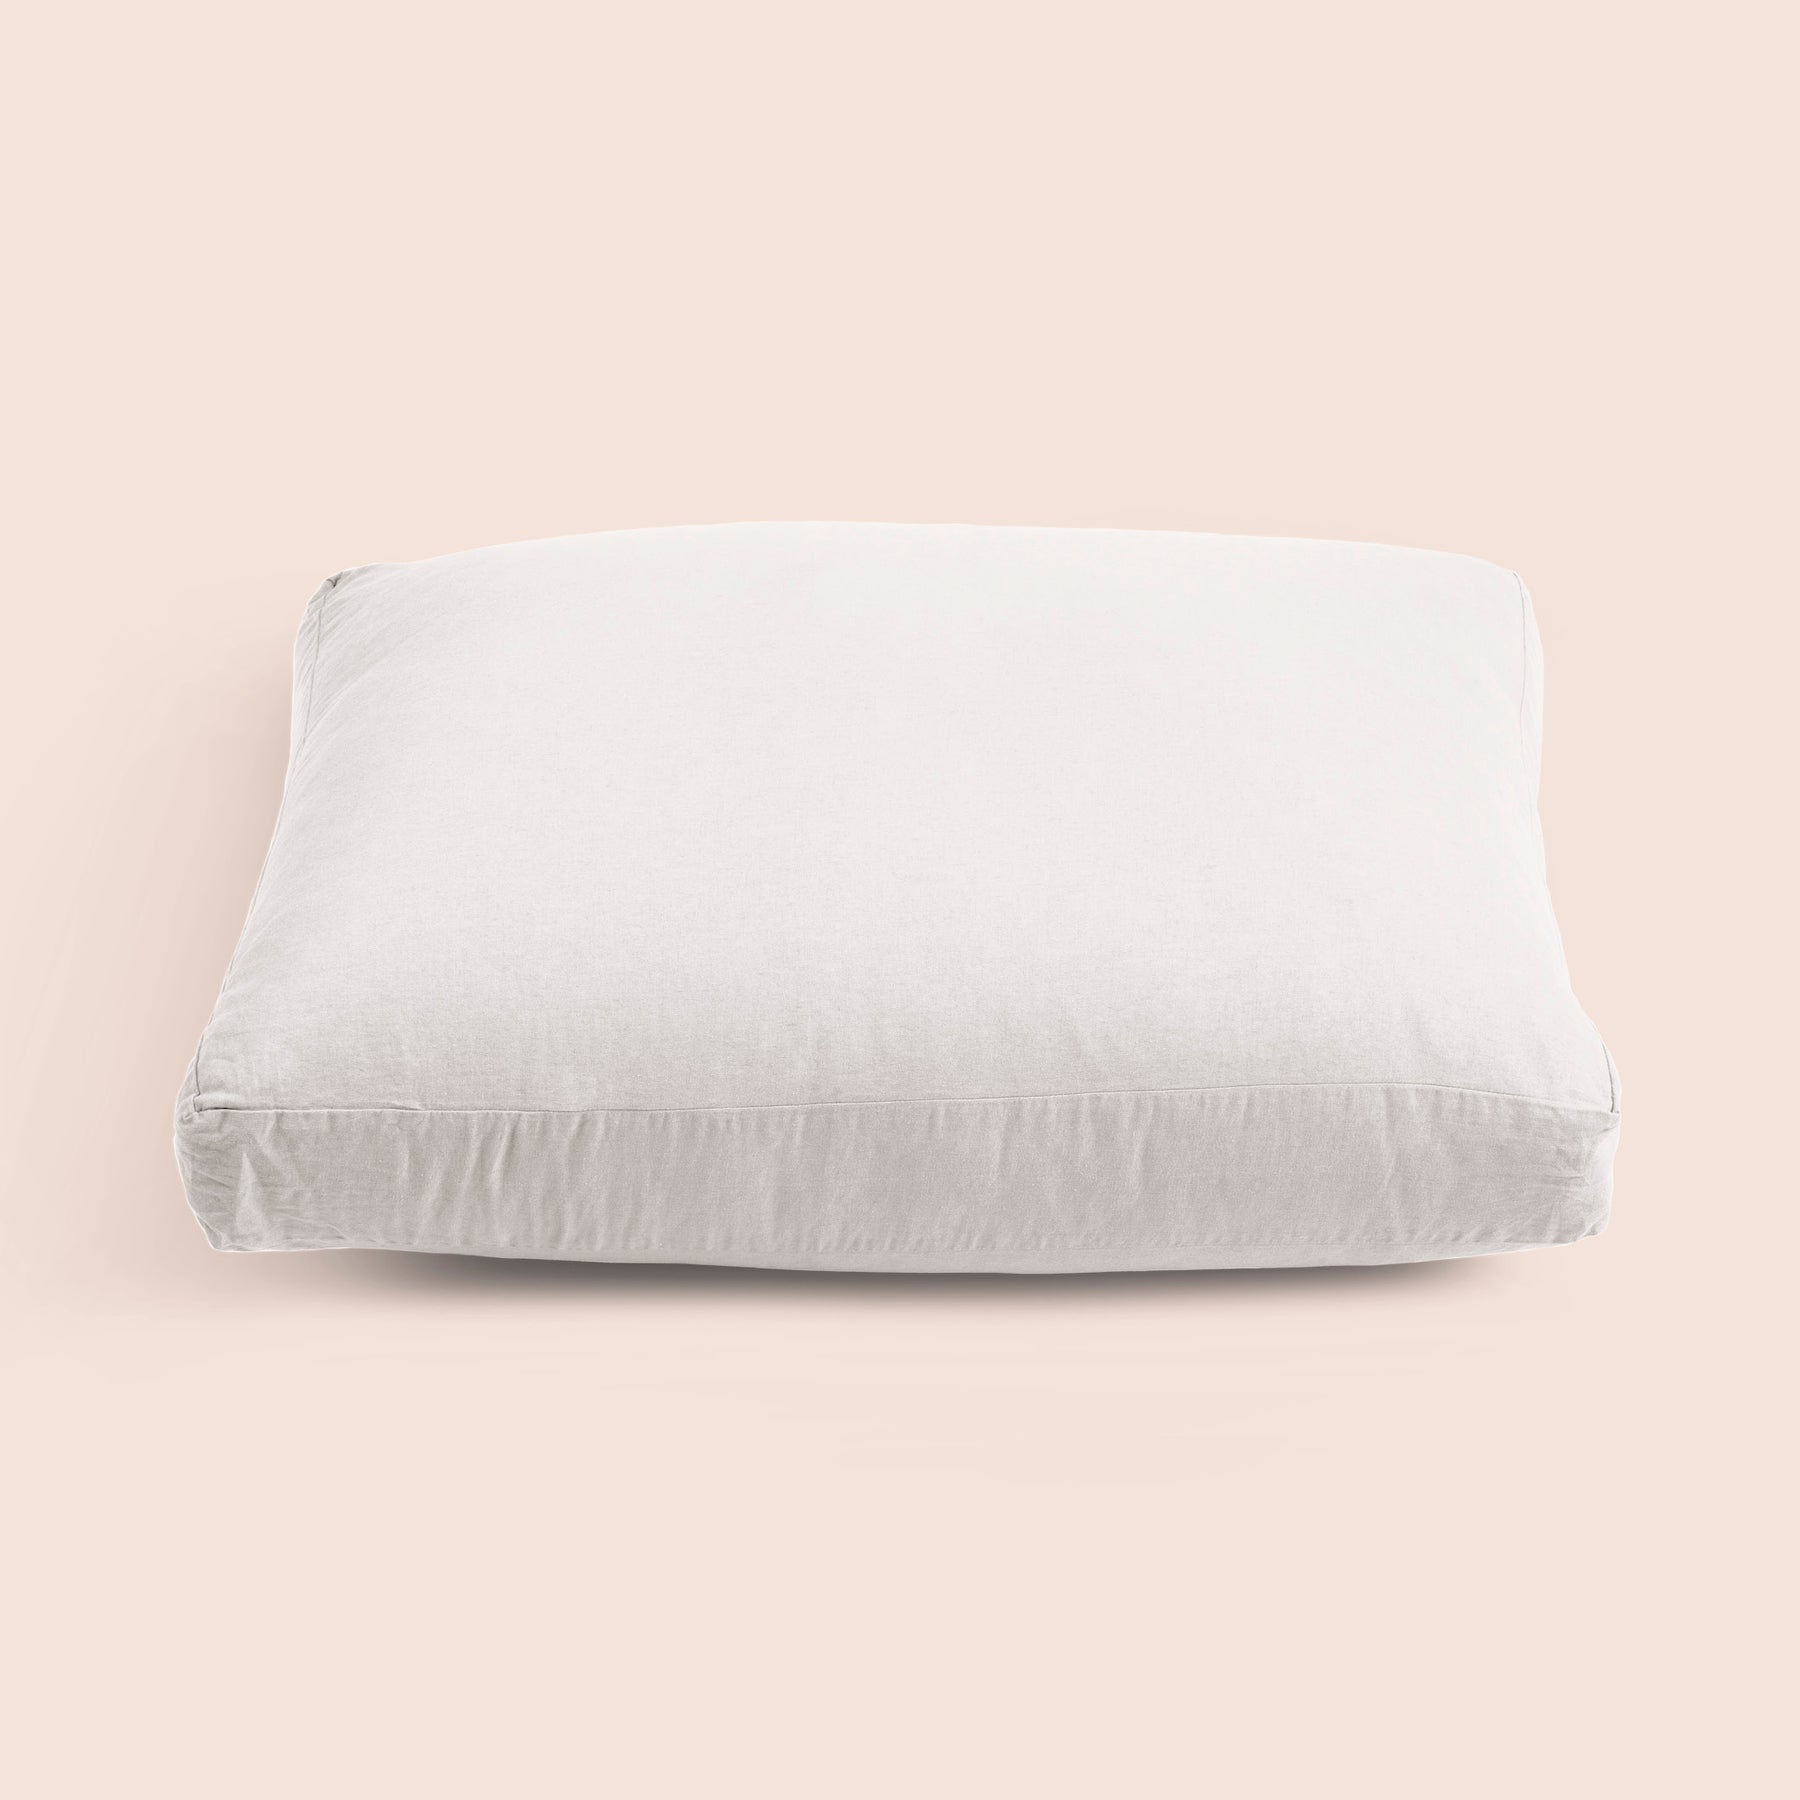 Image of the White Relaxed Hemp Meditation Cushion Cover on a meditation cushion with a light pink background